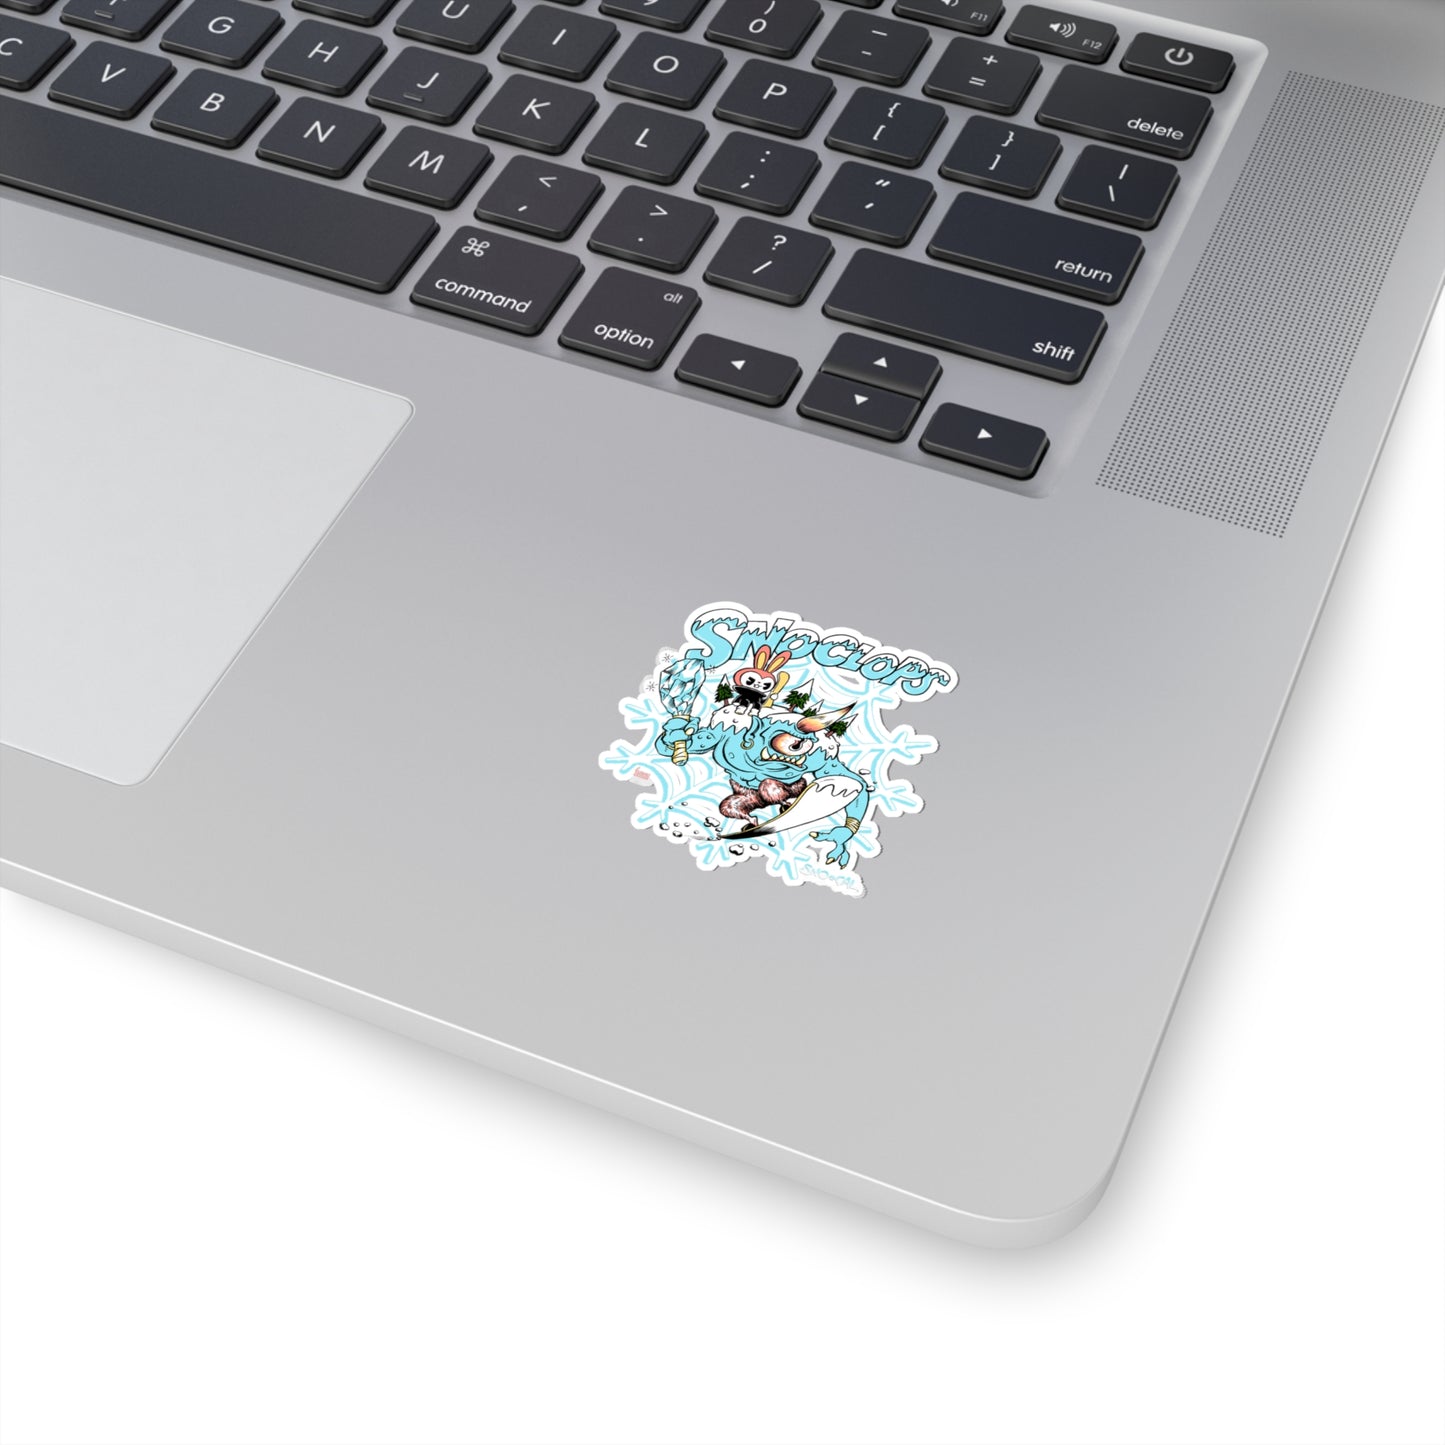 SnoClops with snowflake web sticker - Sno Cal